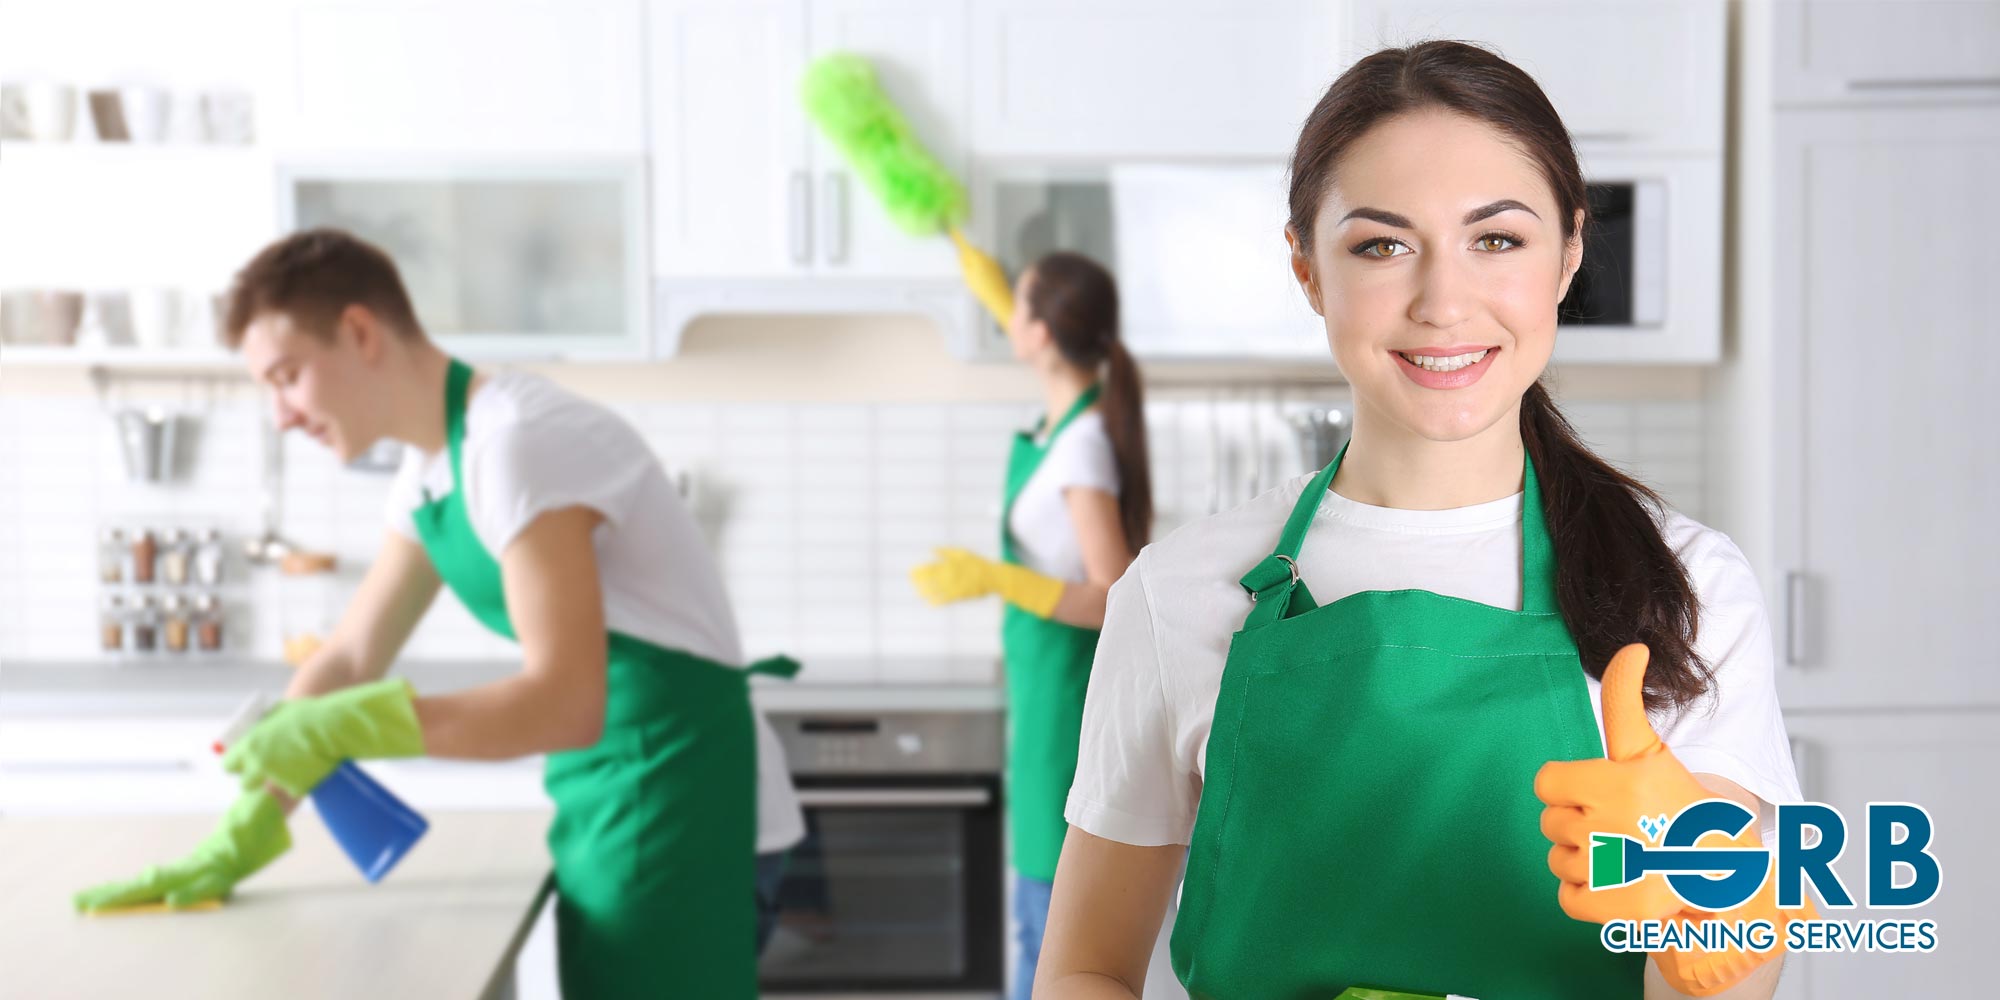 Beverly Hills Cleaning Services - GRB Cleaning Services